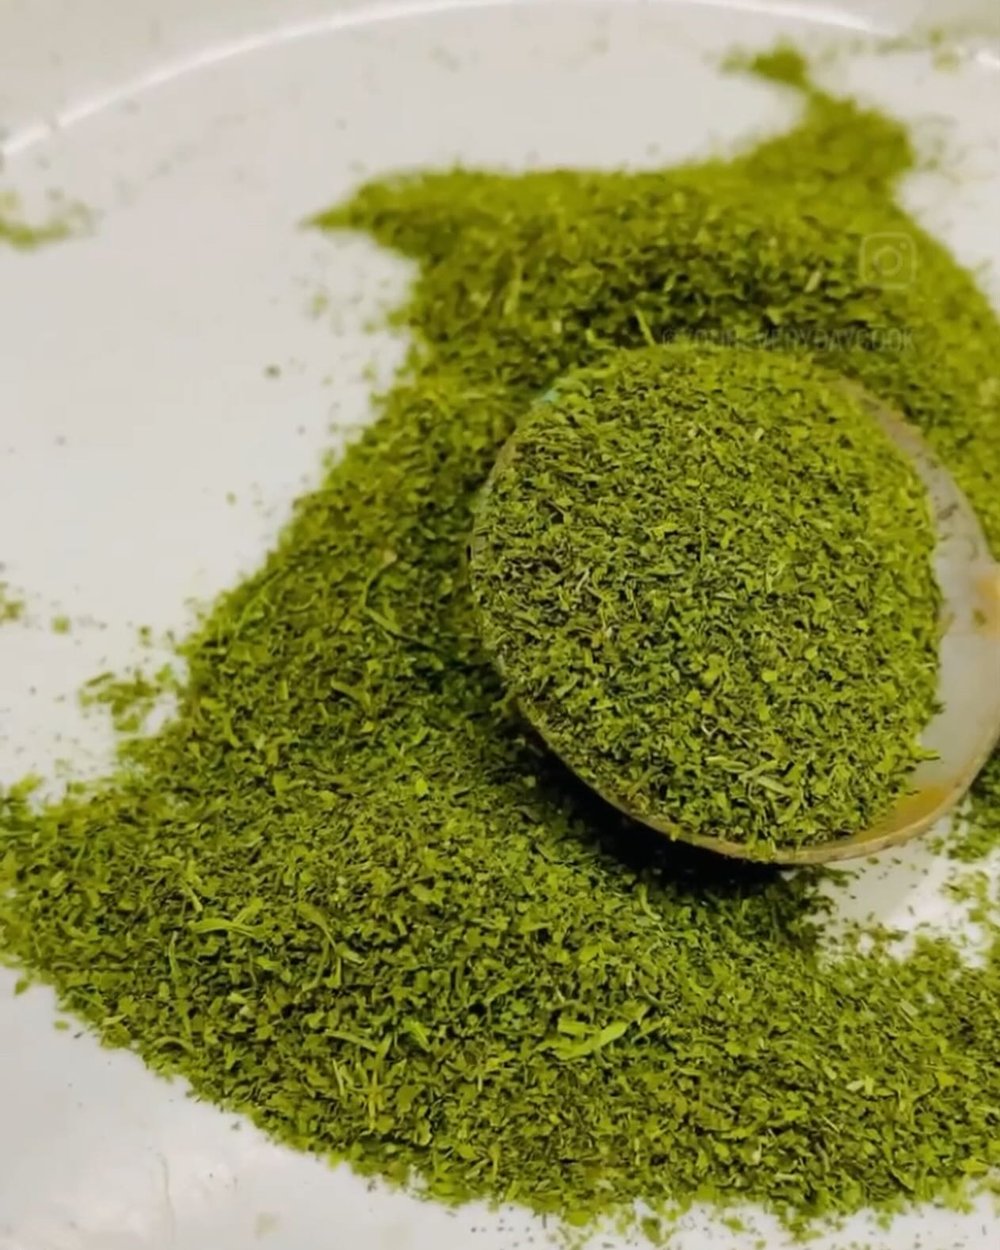 Coriander powder using airfryer with fresh bunch of coriander leaves. 

Wash and pat dry the leaves in between paper towels . Place the dry leaves including stems at the bottom with mesh on top so that the leaves won&rsquo;t fly inside . Set temp to 